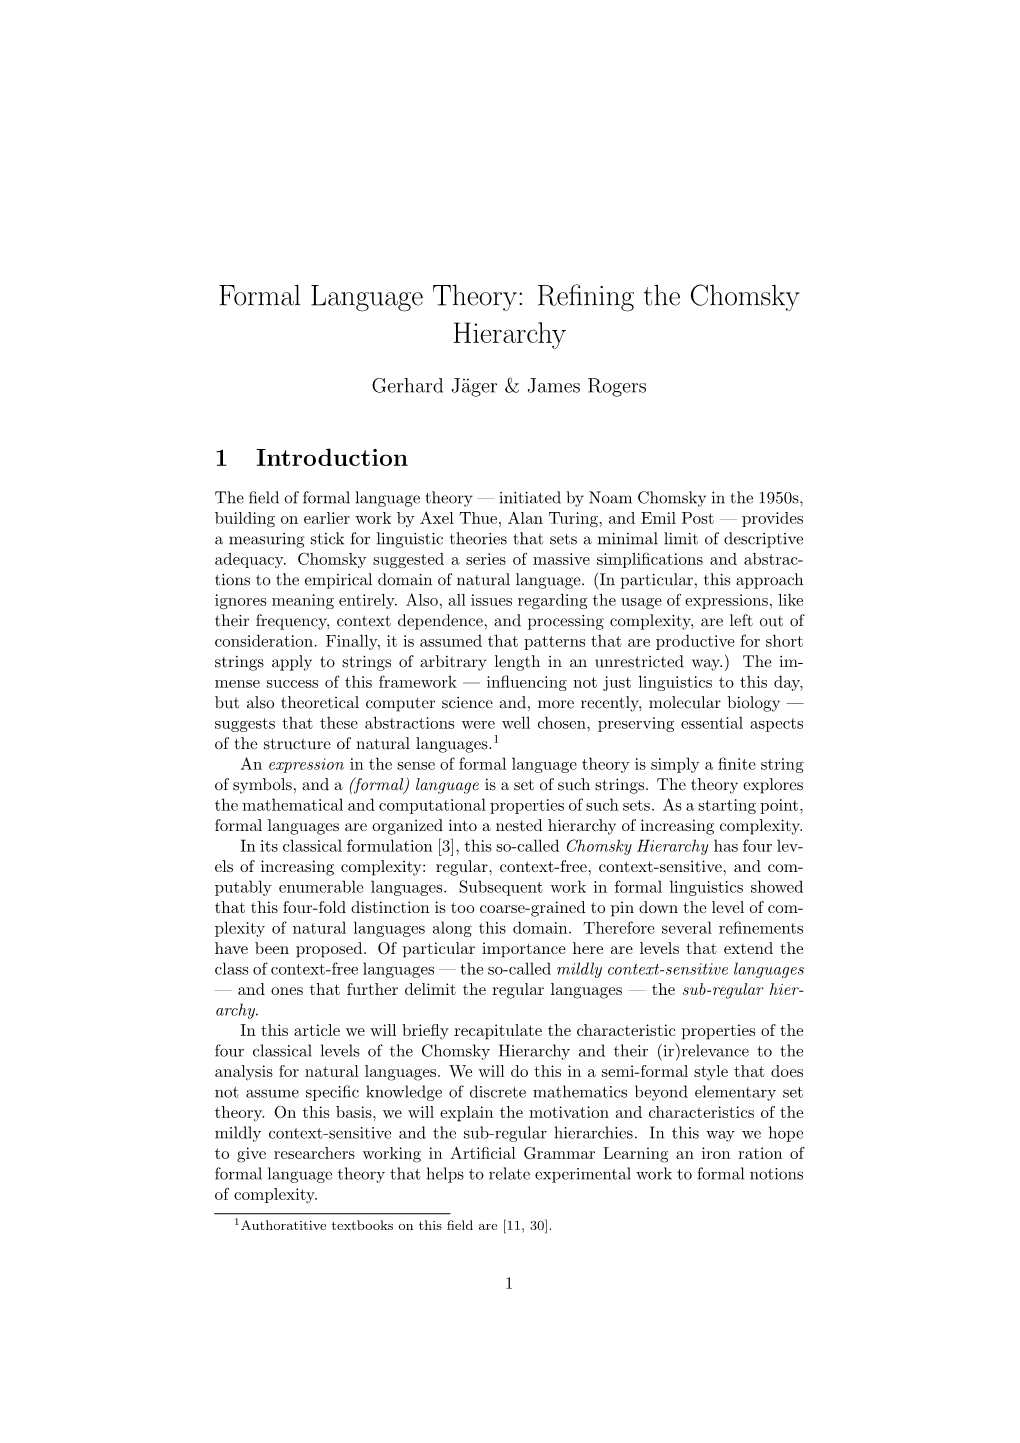 Formal Language Theory: Refining the Chomsky Hierarchy